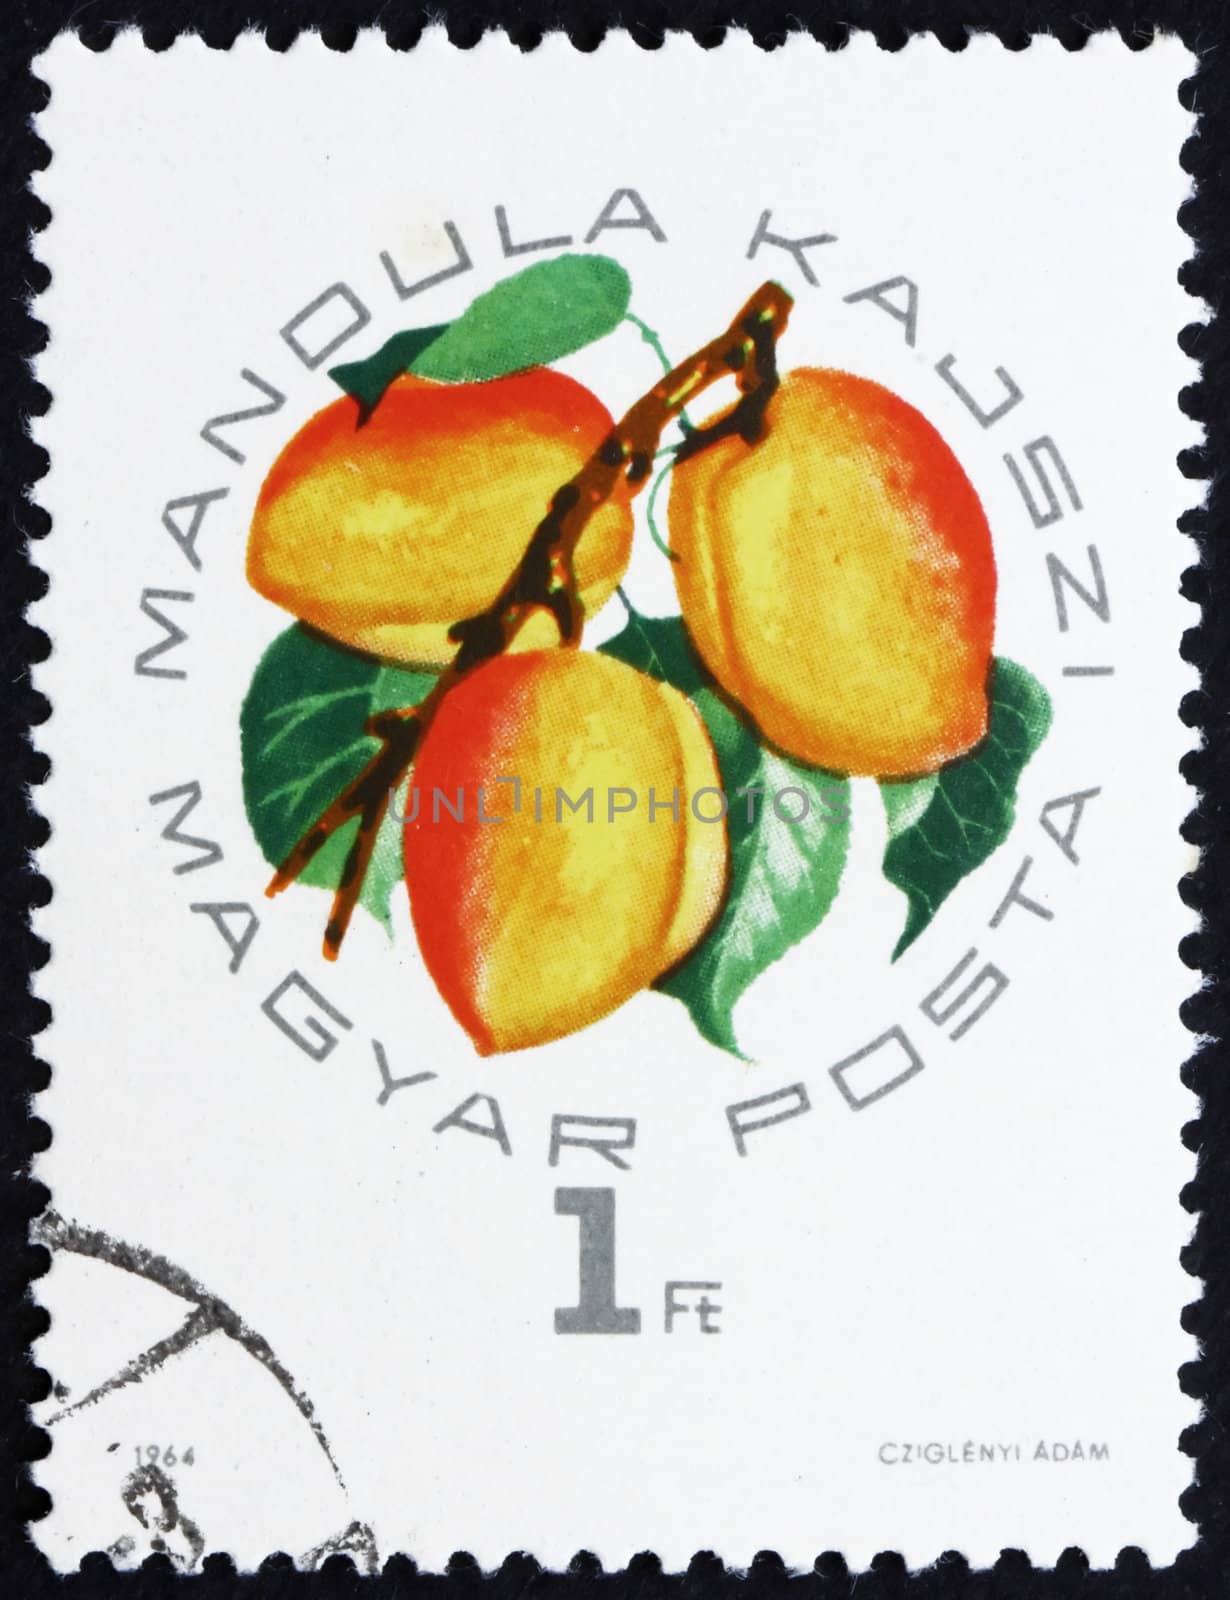 HUNGARY - CIRCA 1964: a stamp printed in the Hungary shows Almond Apricot, Fruit, circa 1964